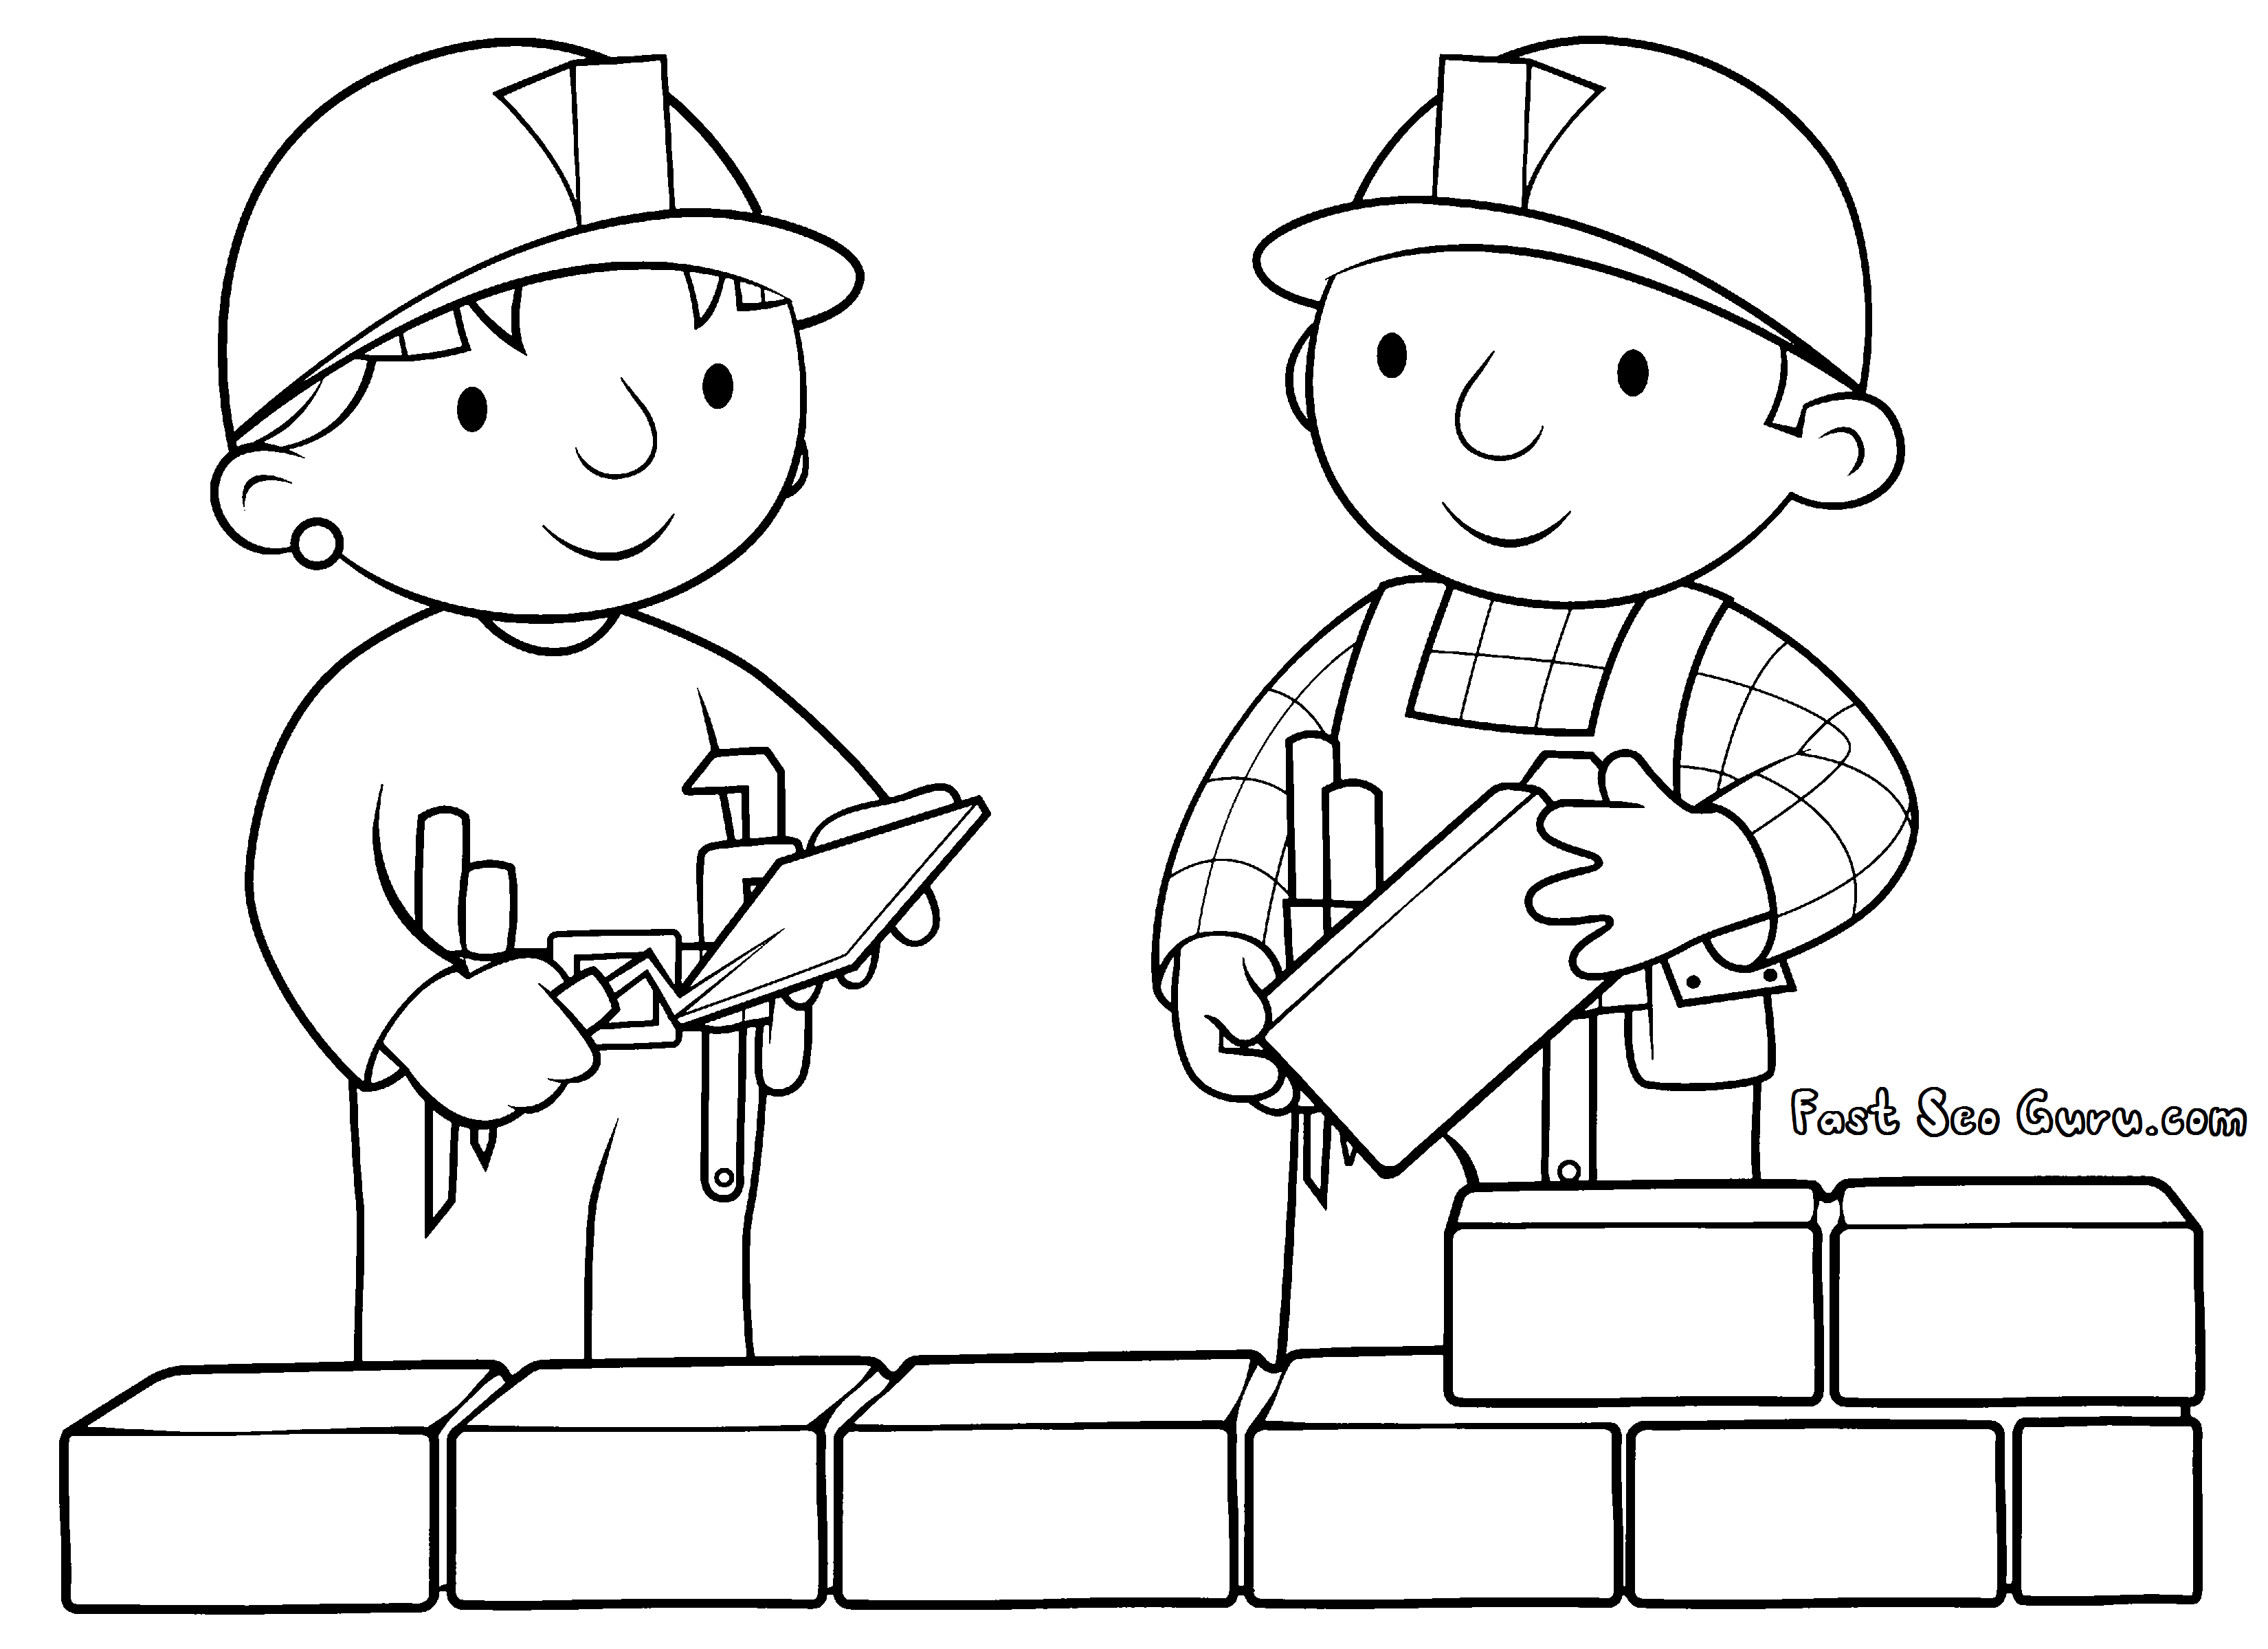 Printable Bob the Builder and Wendy Coloring Pages for kids